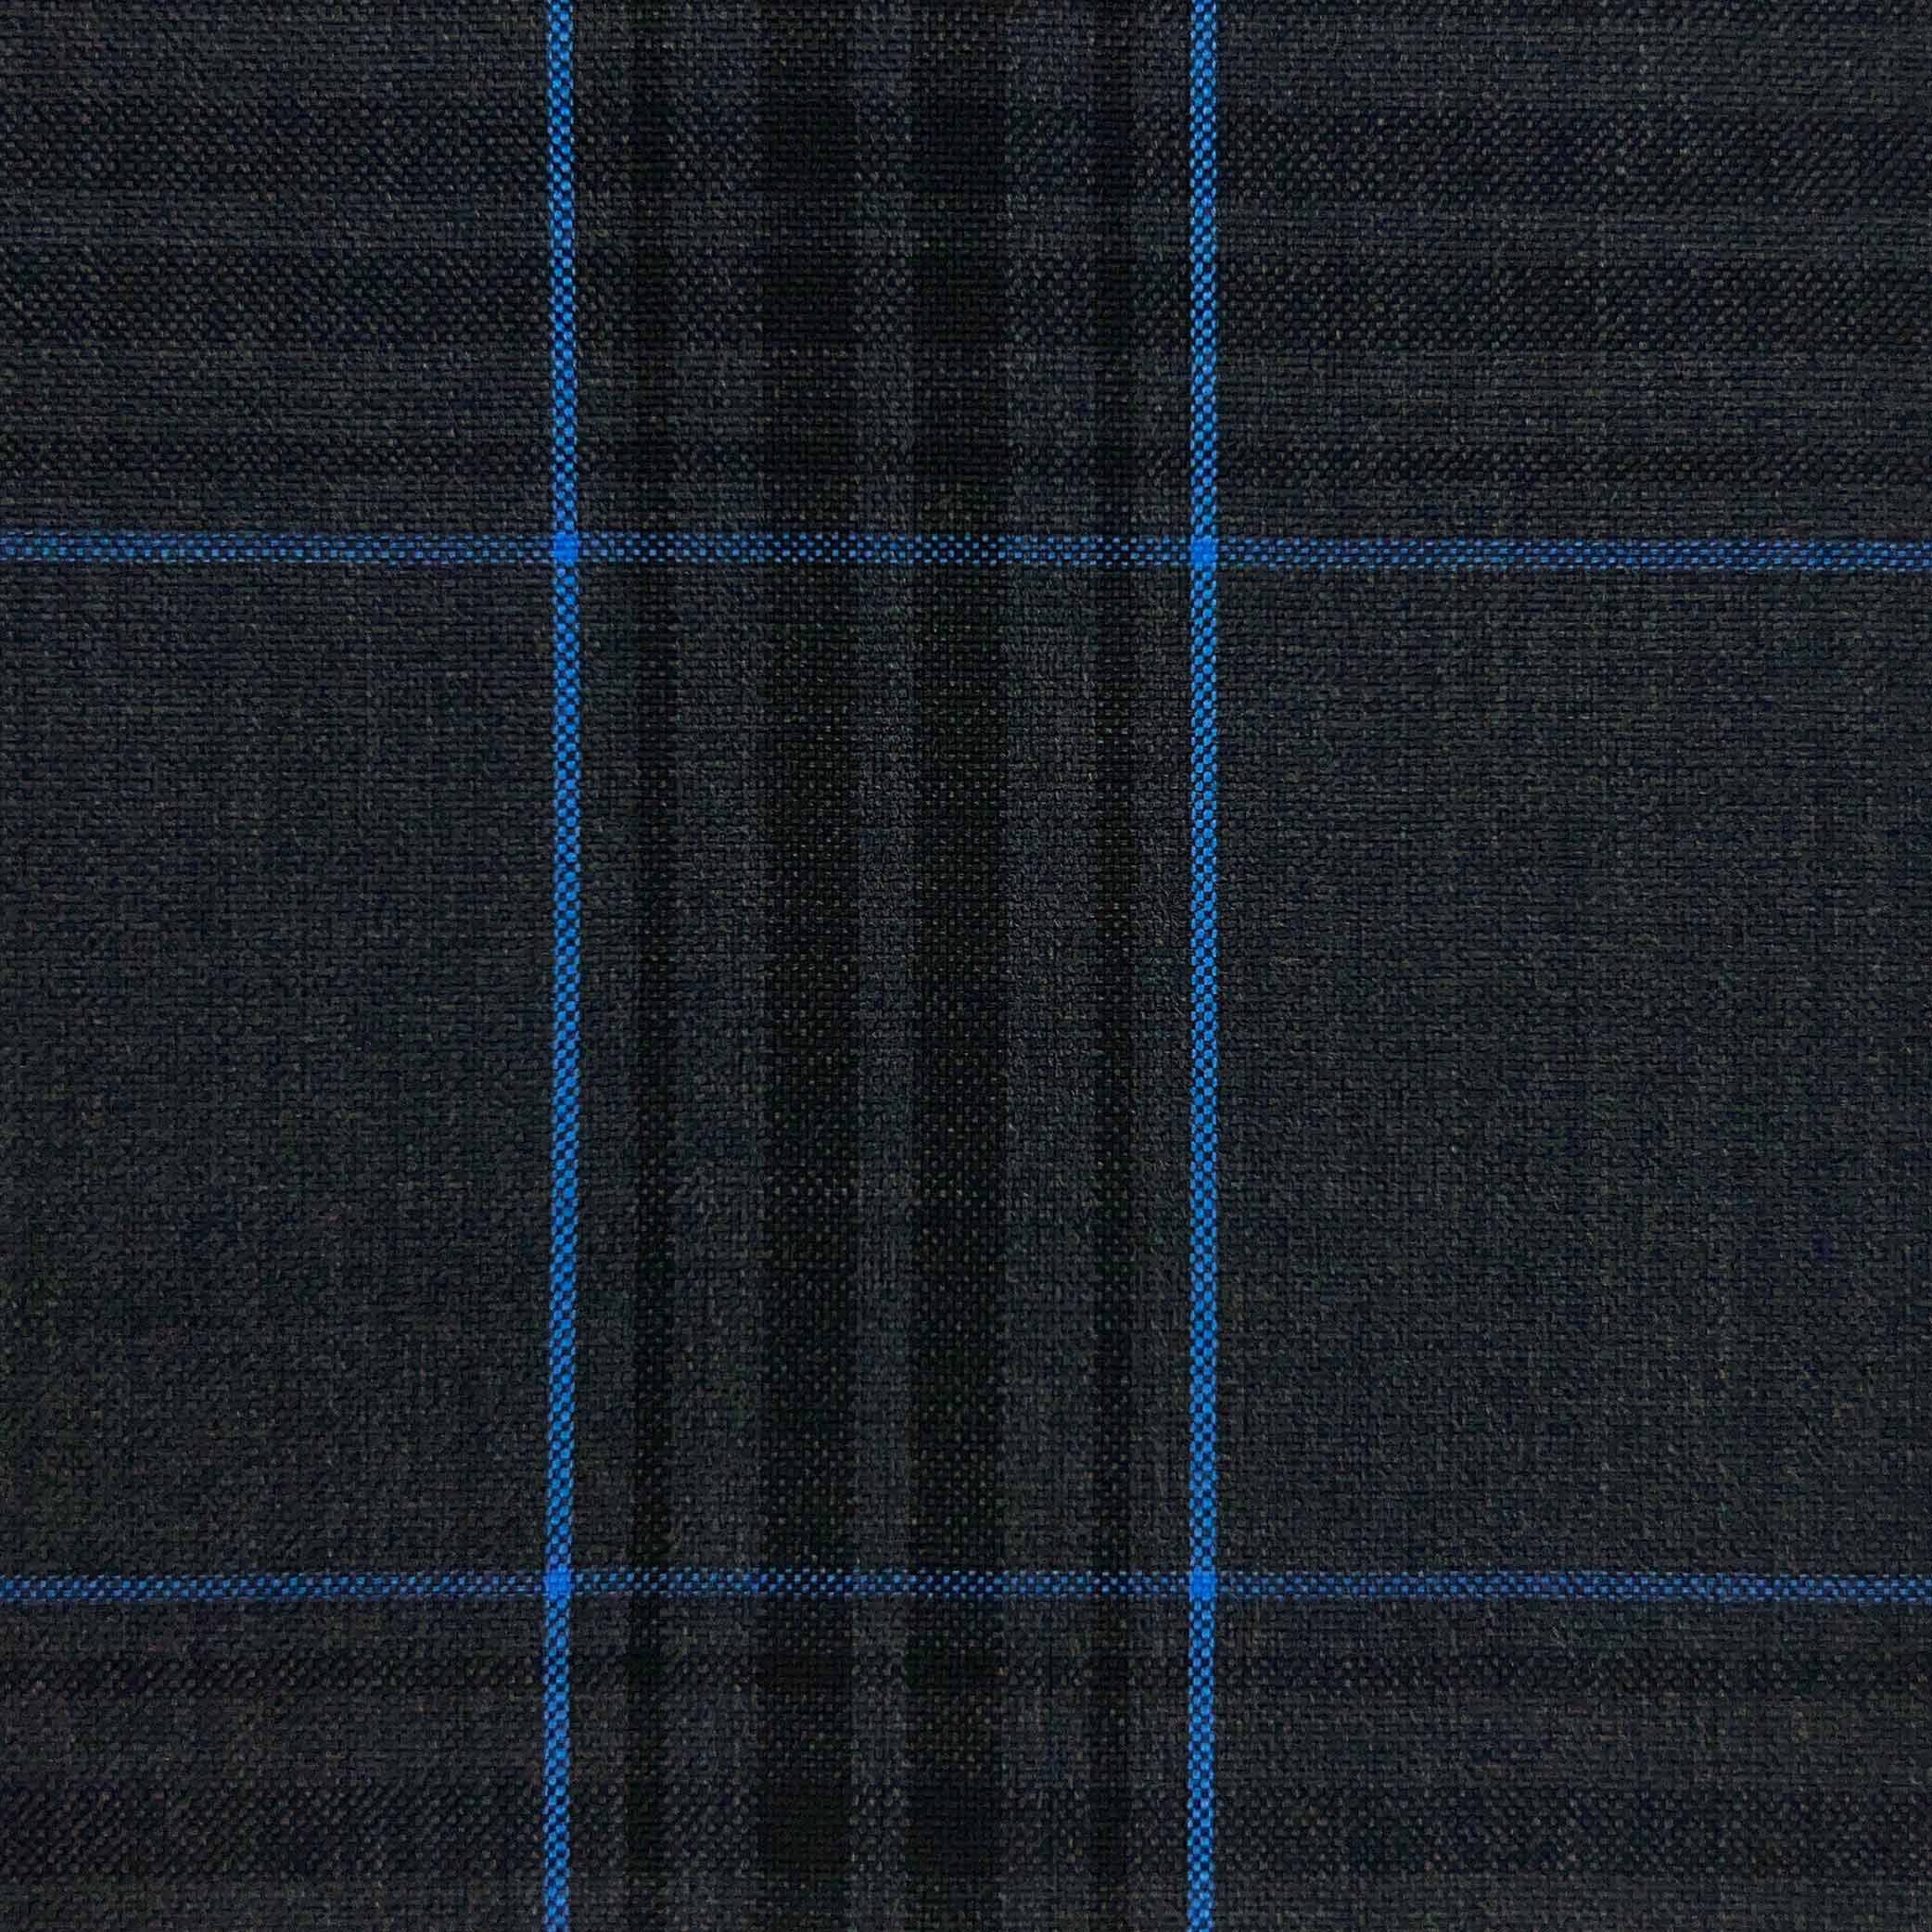 Westwood Hart Online Custom Hand Tailor Suits Sportcoats Trousers Waistcoats Overcoats Charcoal Grey Large Black Electric Blue Plaid Design